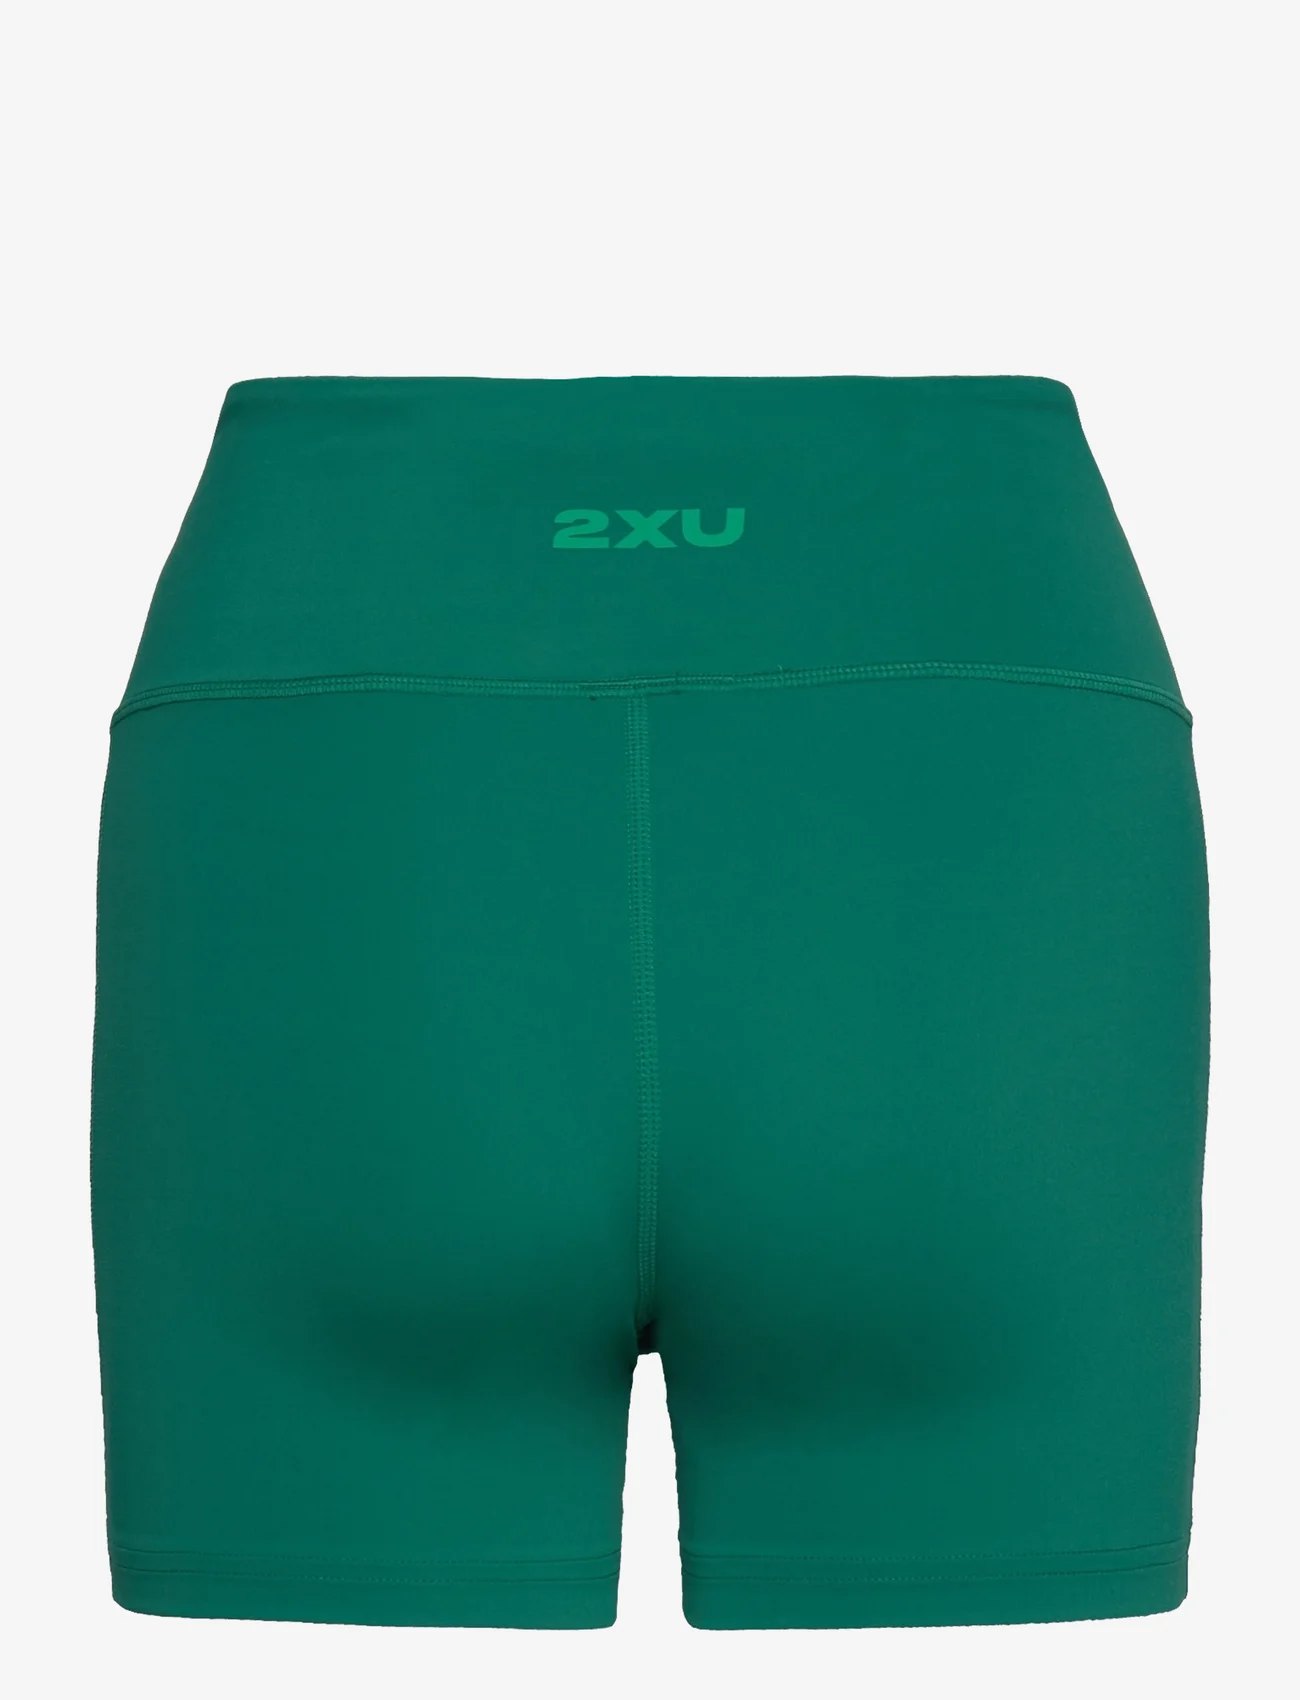 2XU - FORM HI-RISE COMP SHORTS - cycling shorts - forest green/forest green - 1